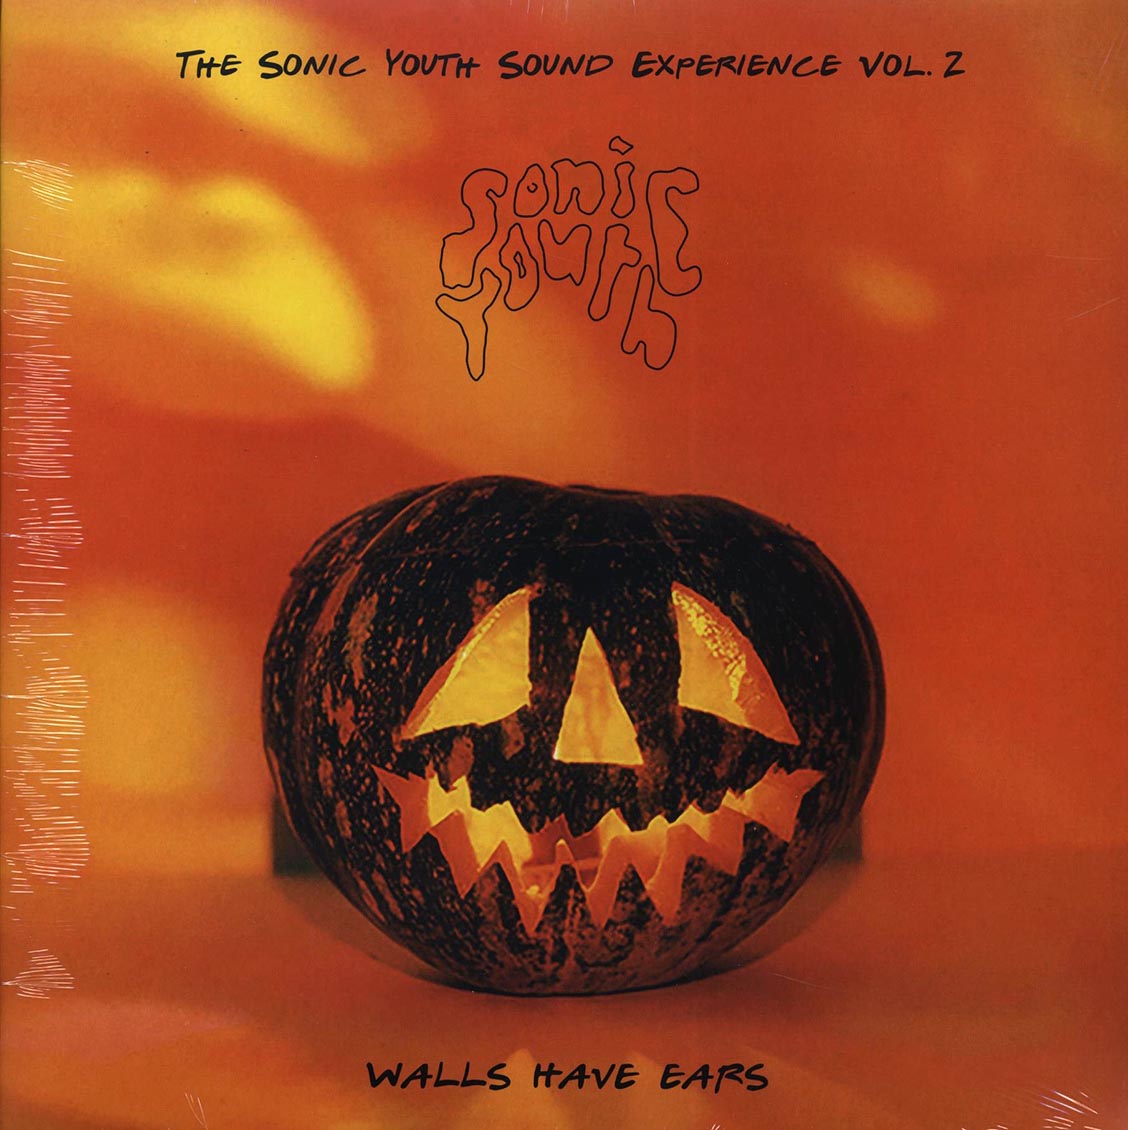 Sonic Youth - Walls Have Ears Volume 2: The Sonic Youth Sound Experience - Vinyl LP